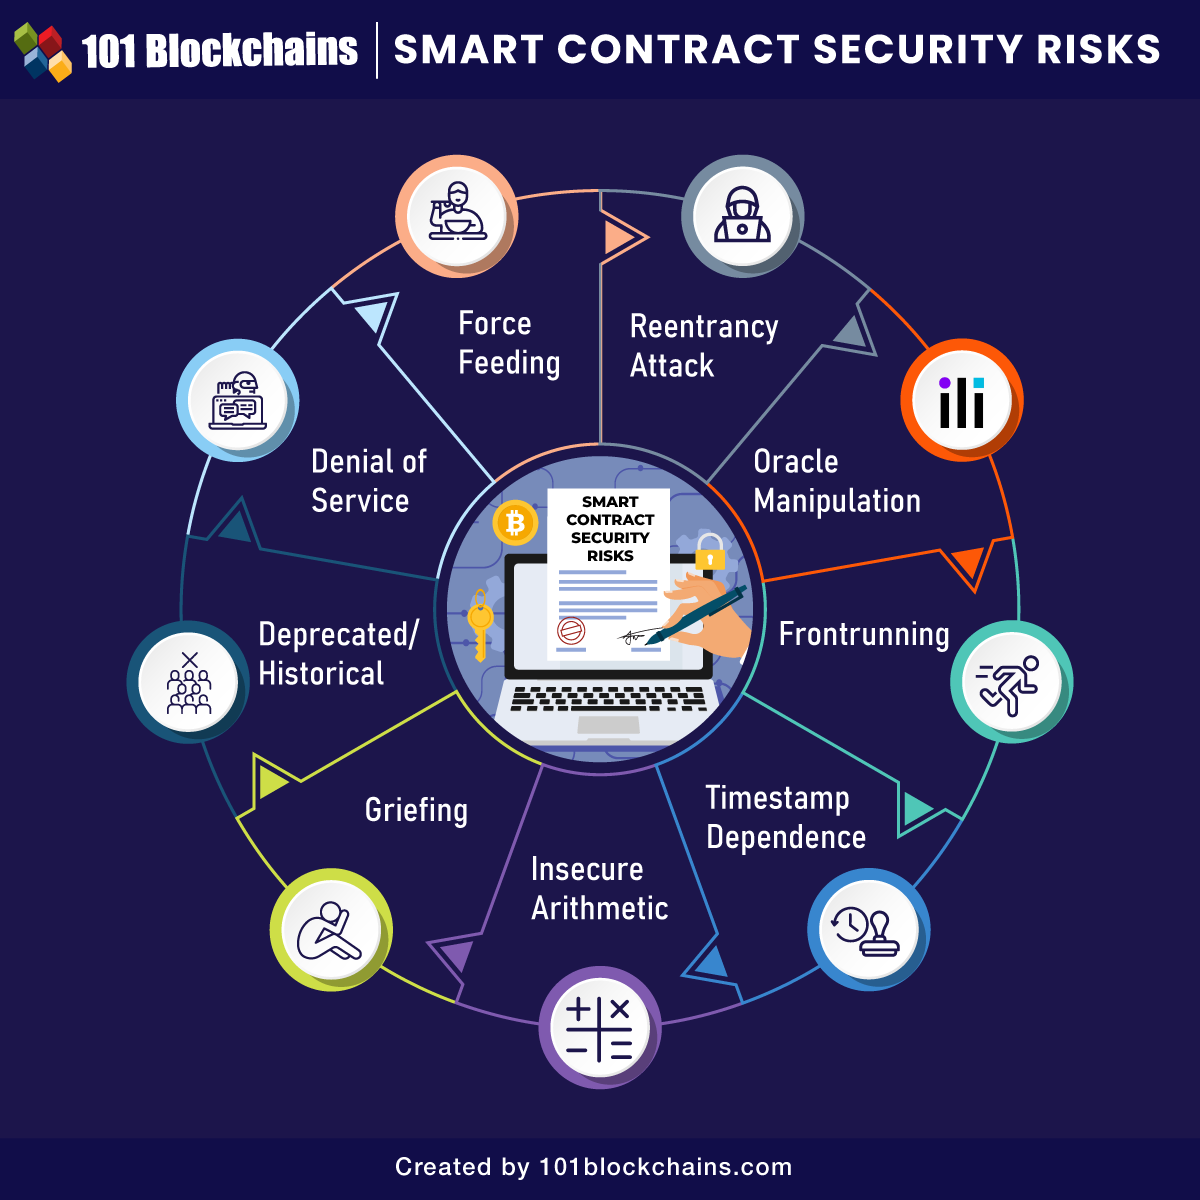 Smart Contract Security Risks